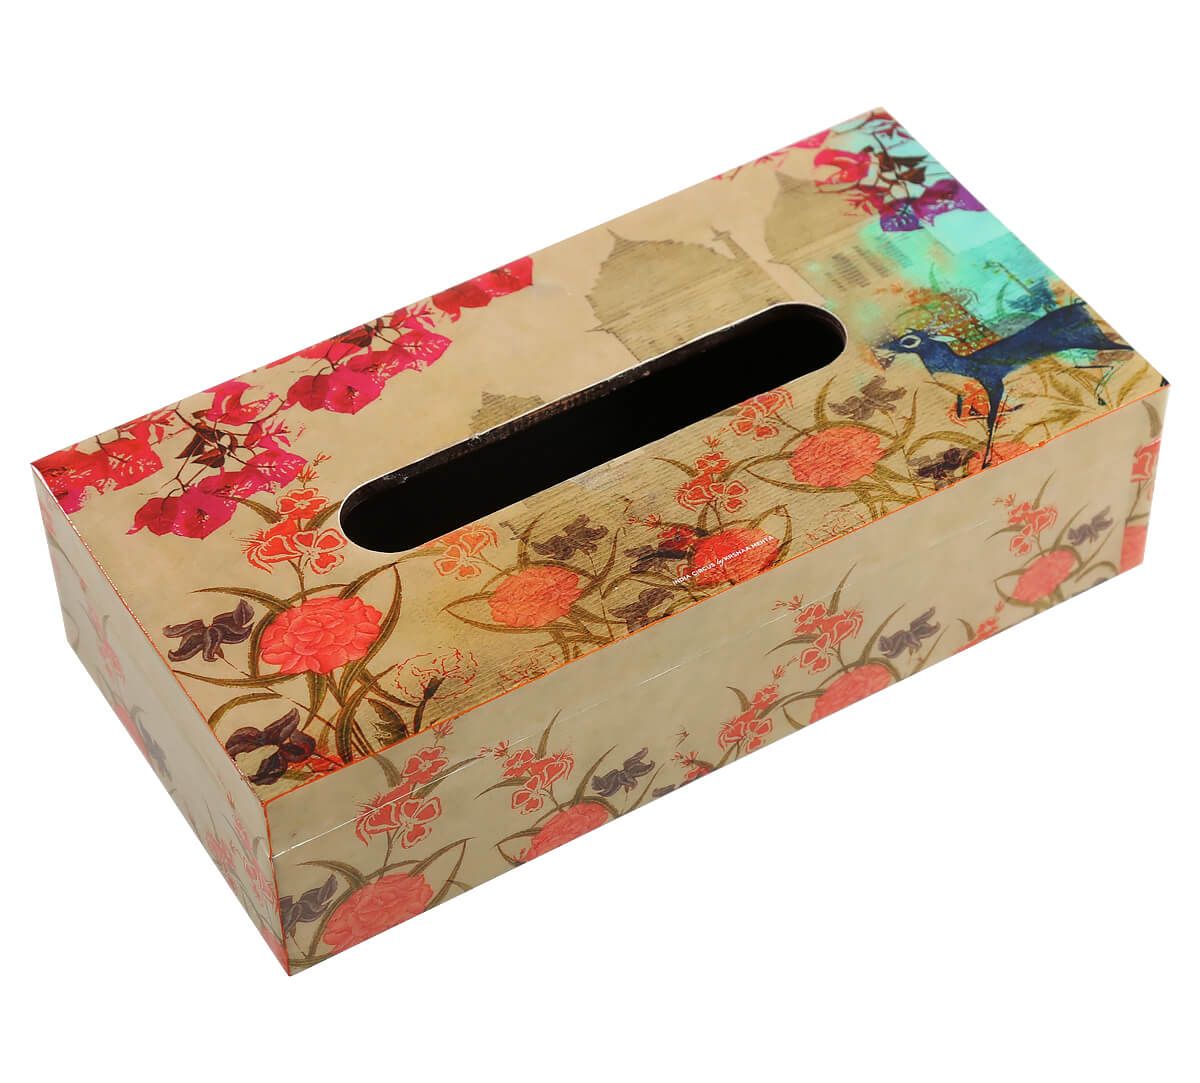 India Circus Palaces in Paradise Tissue Box Holder